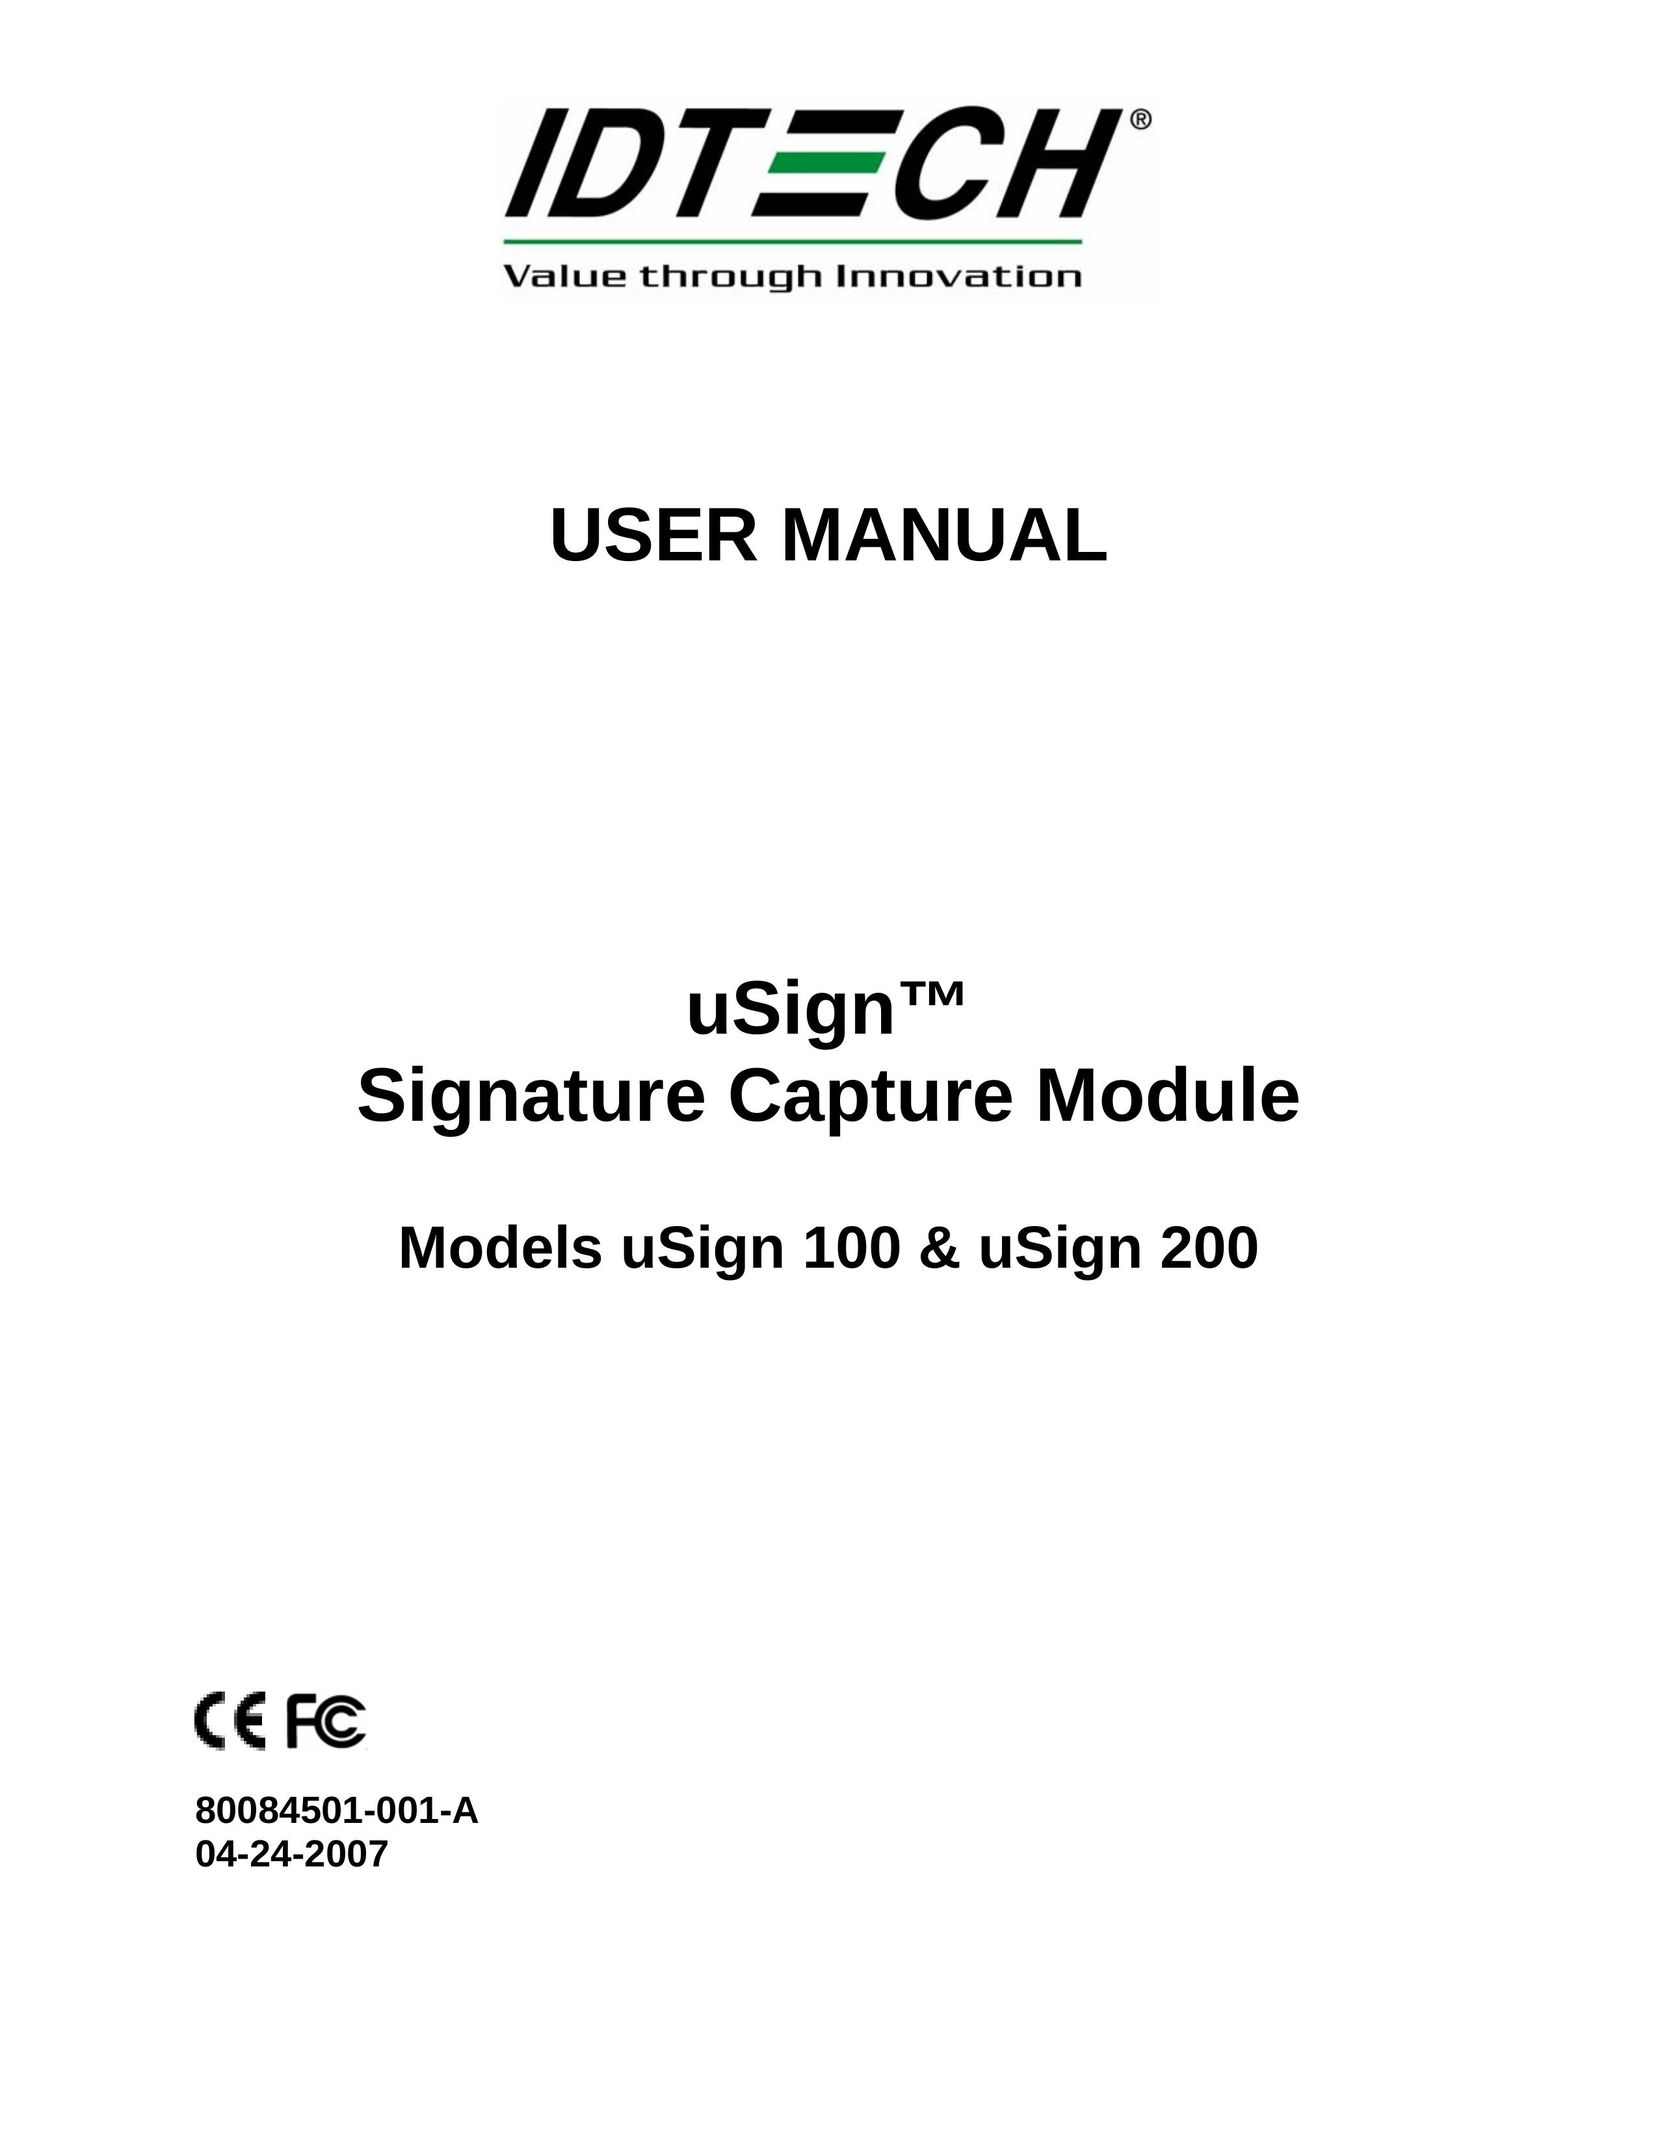 Compaq uSign 100 Network Router User Manual